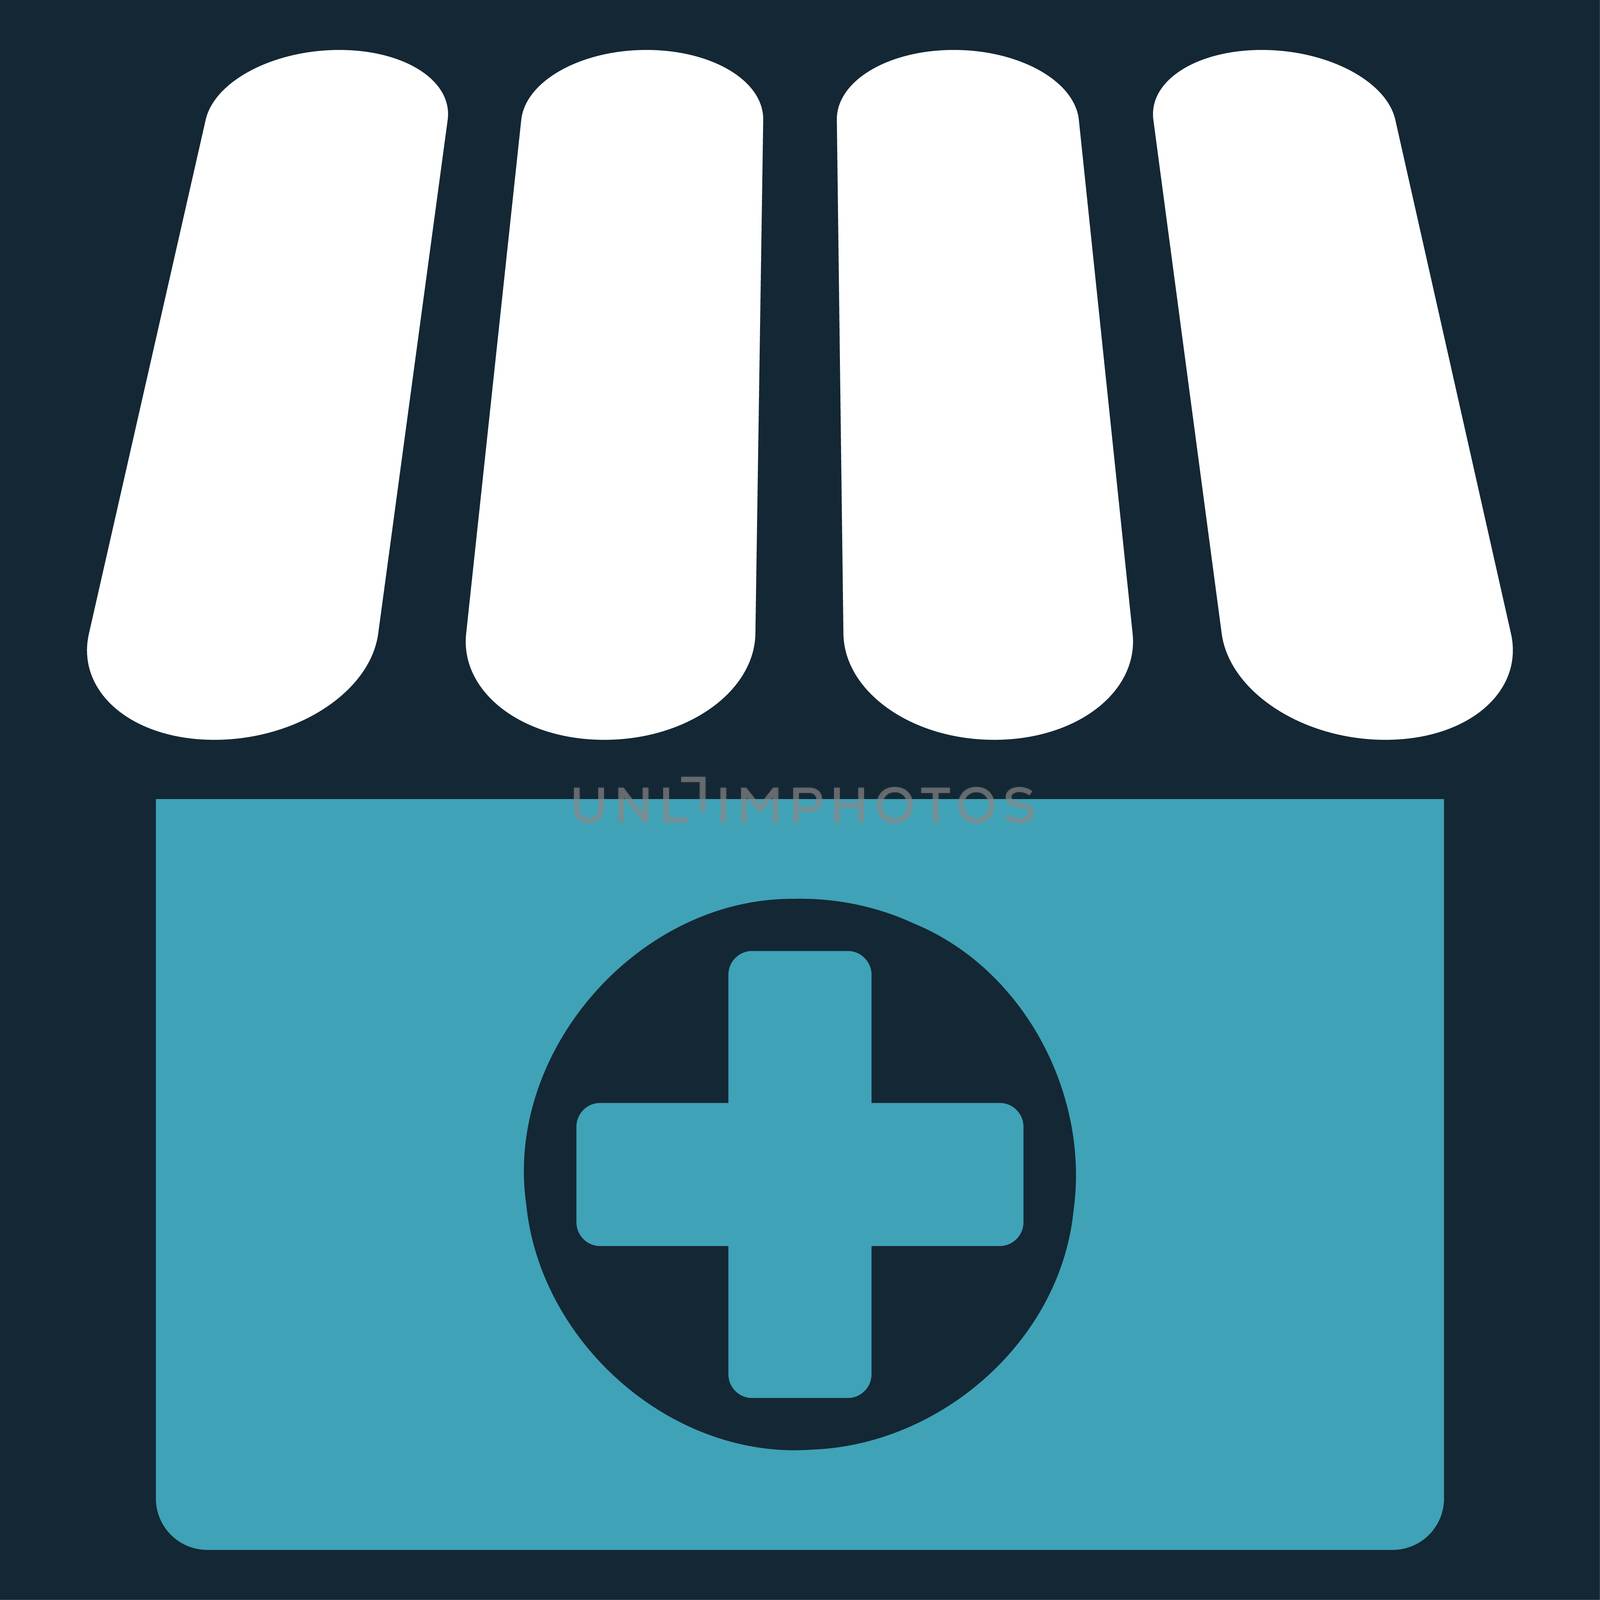 Apothecary raster icon. Style is bicolor flat symbol, blue and white colors, rounded angles, dark blue background.